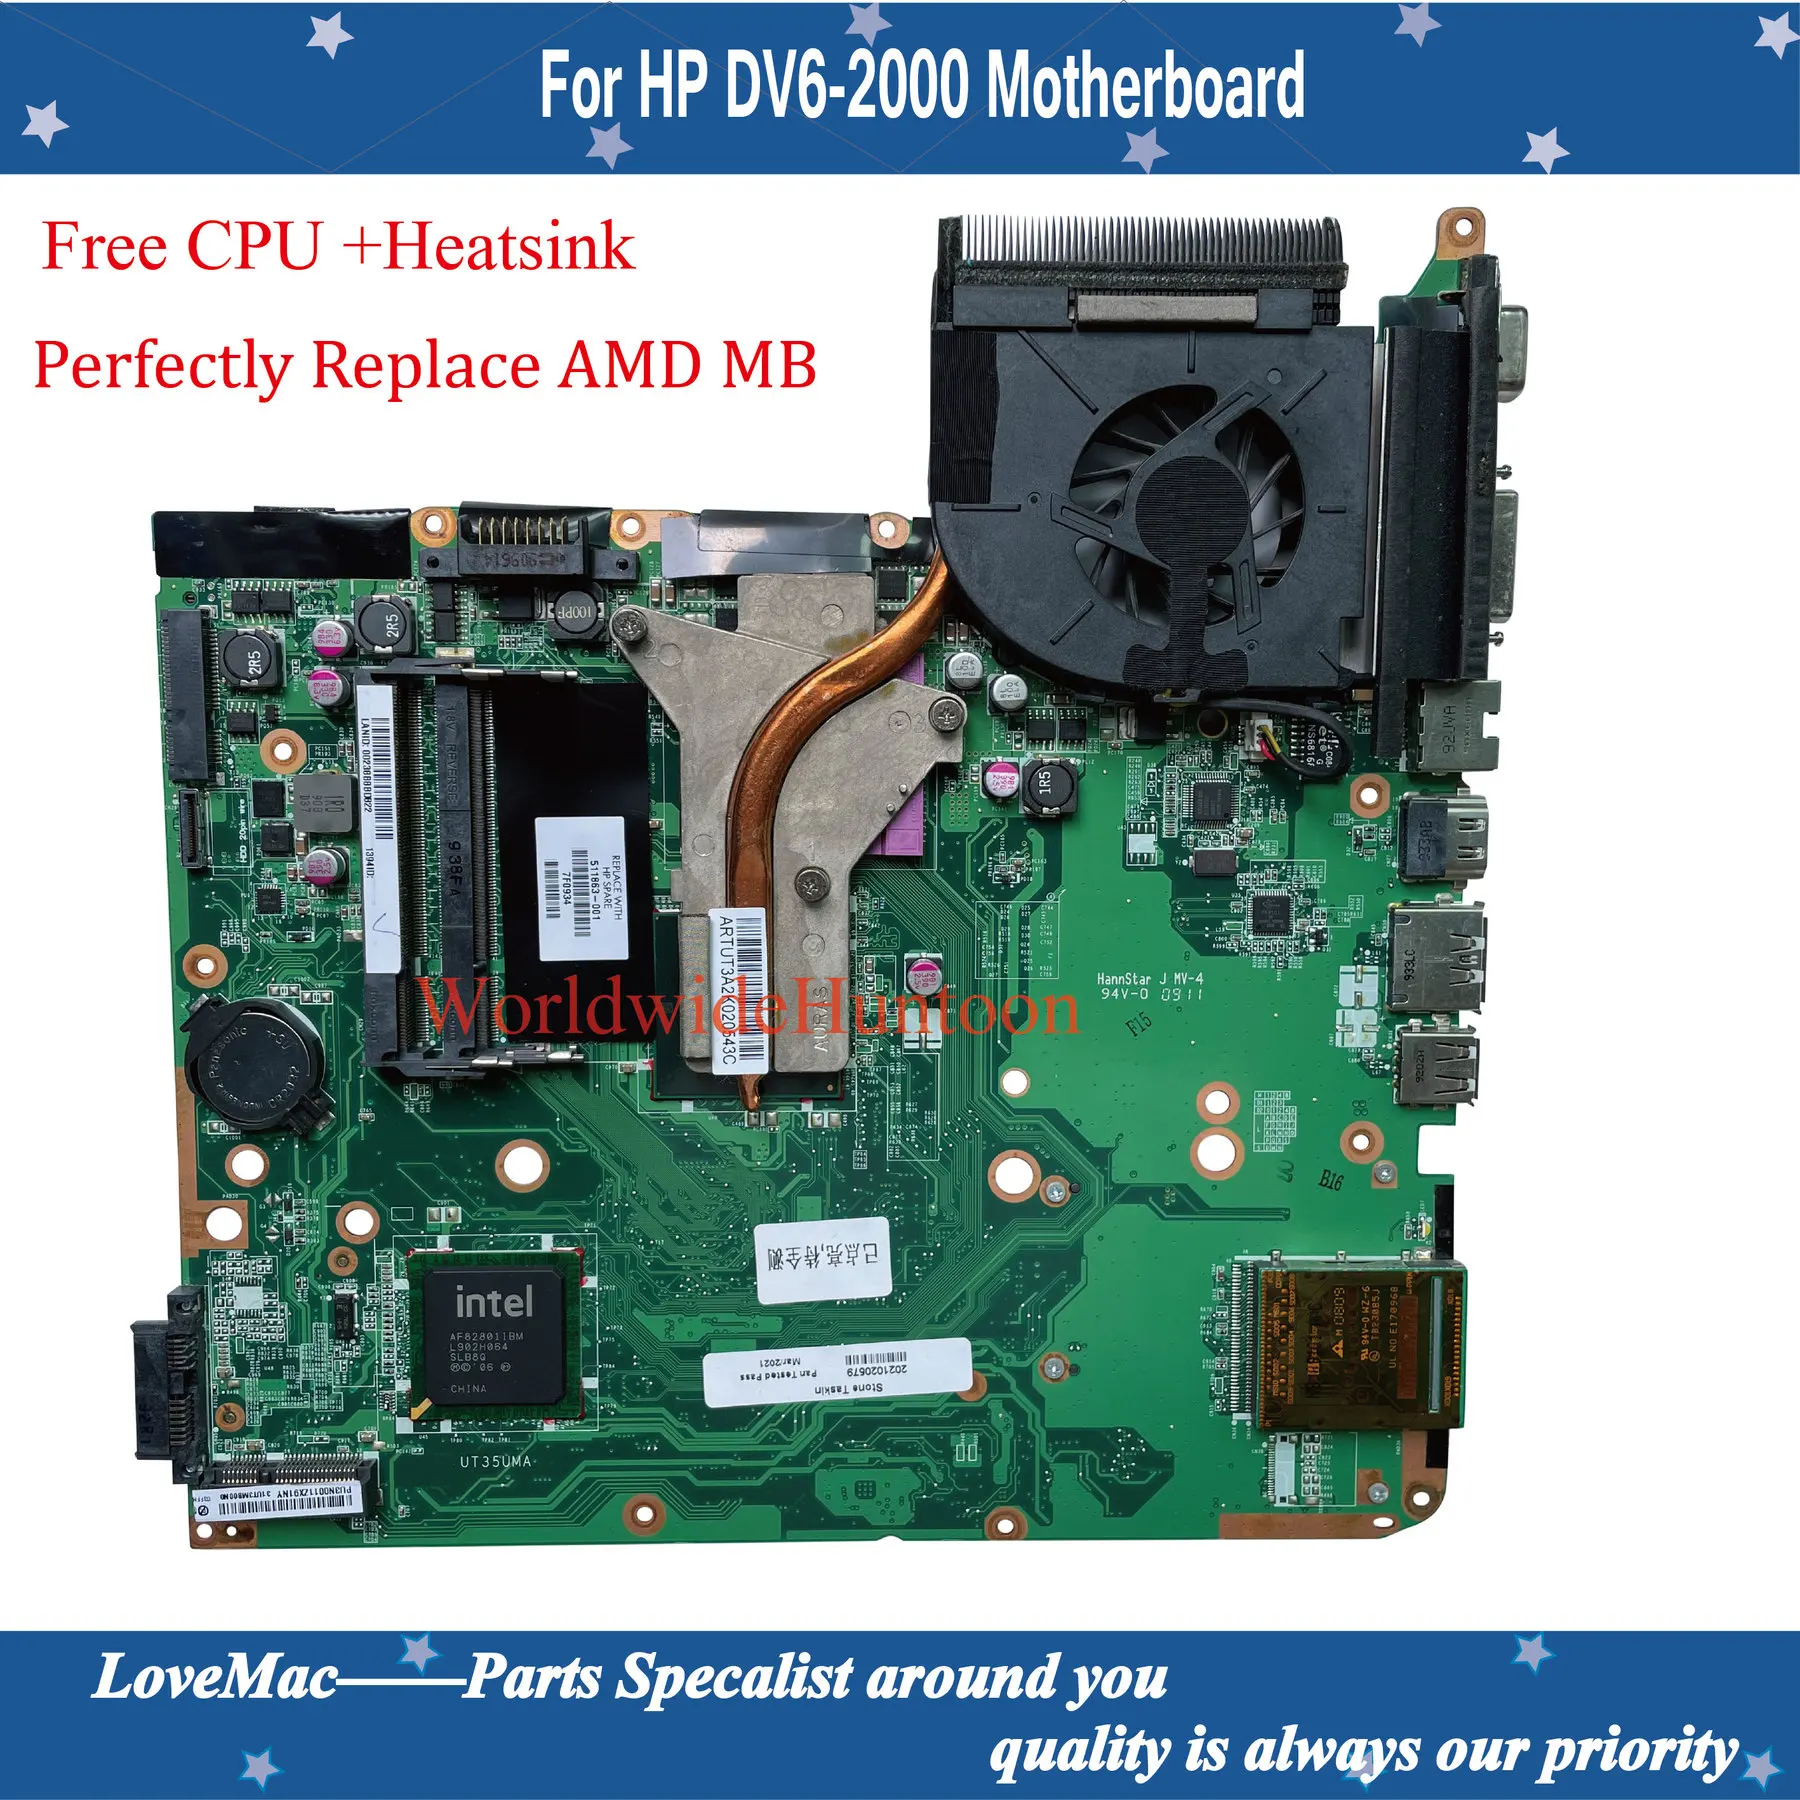 511863-001 For HP Pavilion DV6-2000  Motherboard Free CPU heatsink  Perfectly Compatiable  AMD issue For 571187-001 571188-001